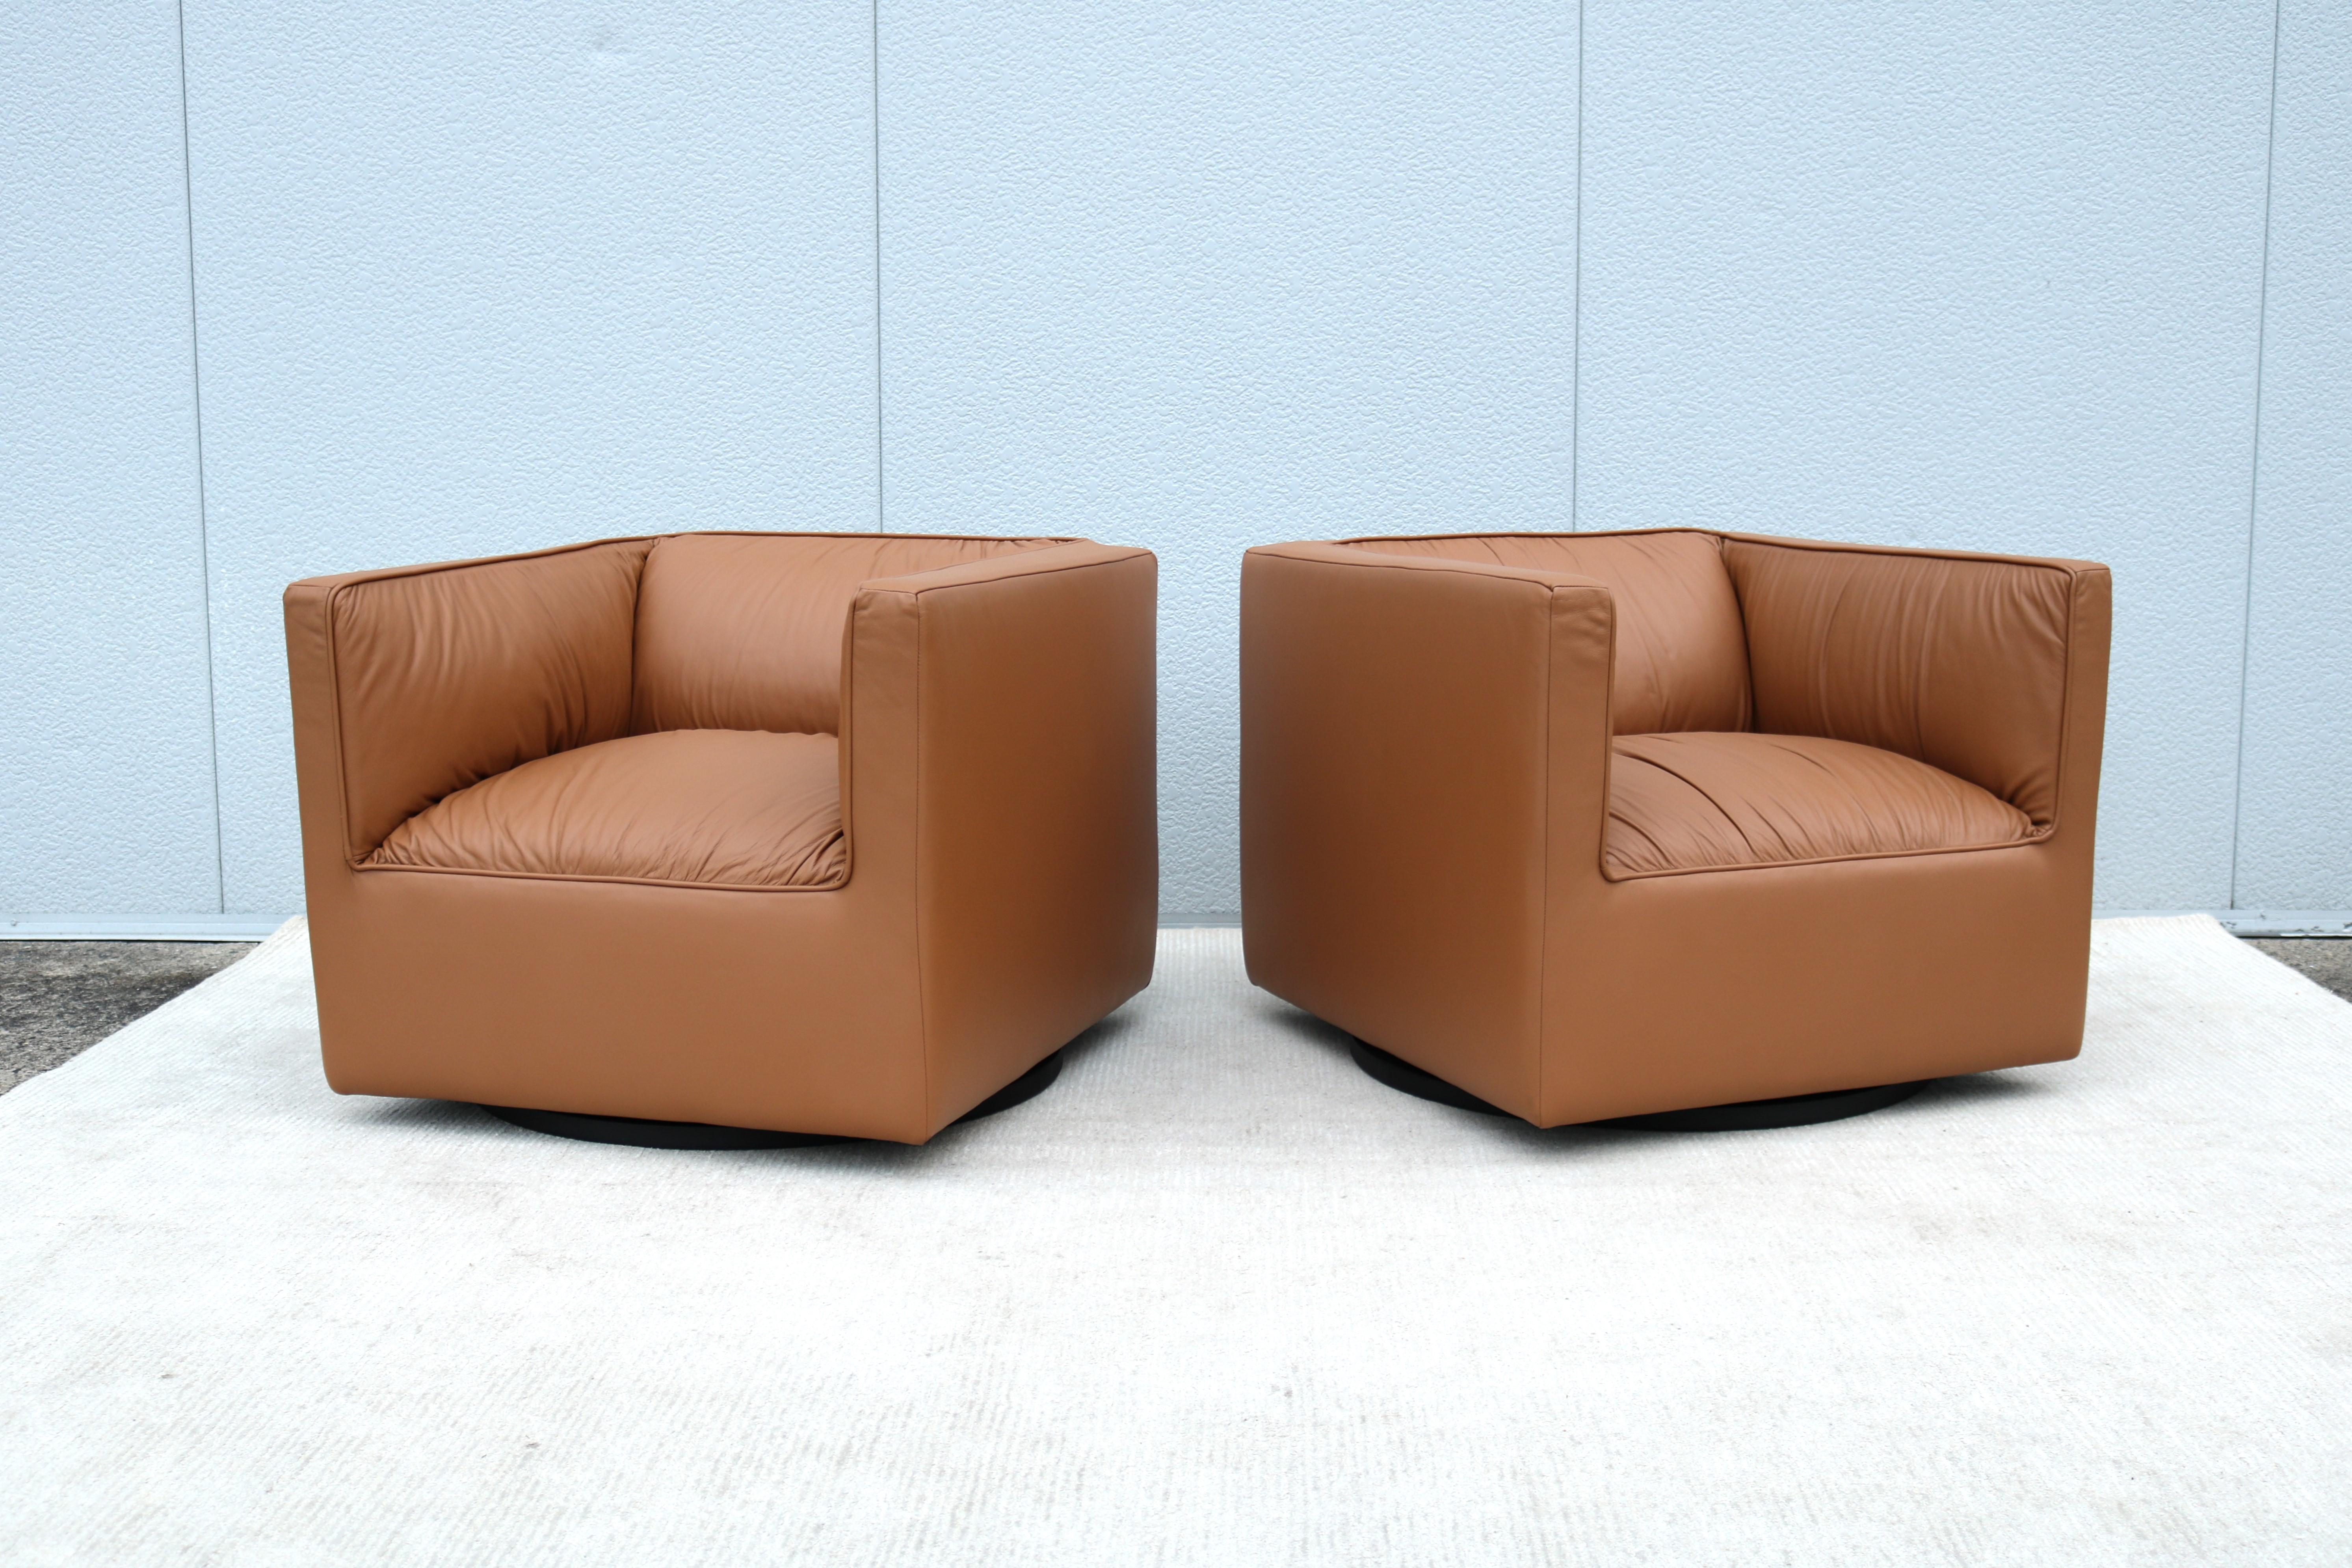 Modern Toan Nguyen for Studio TK Infinito Leather Swivel Lounge Chairs - a Pair For Sale 4